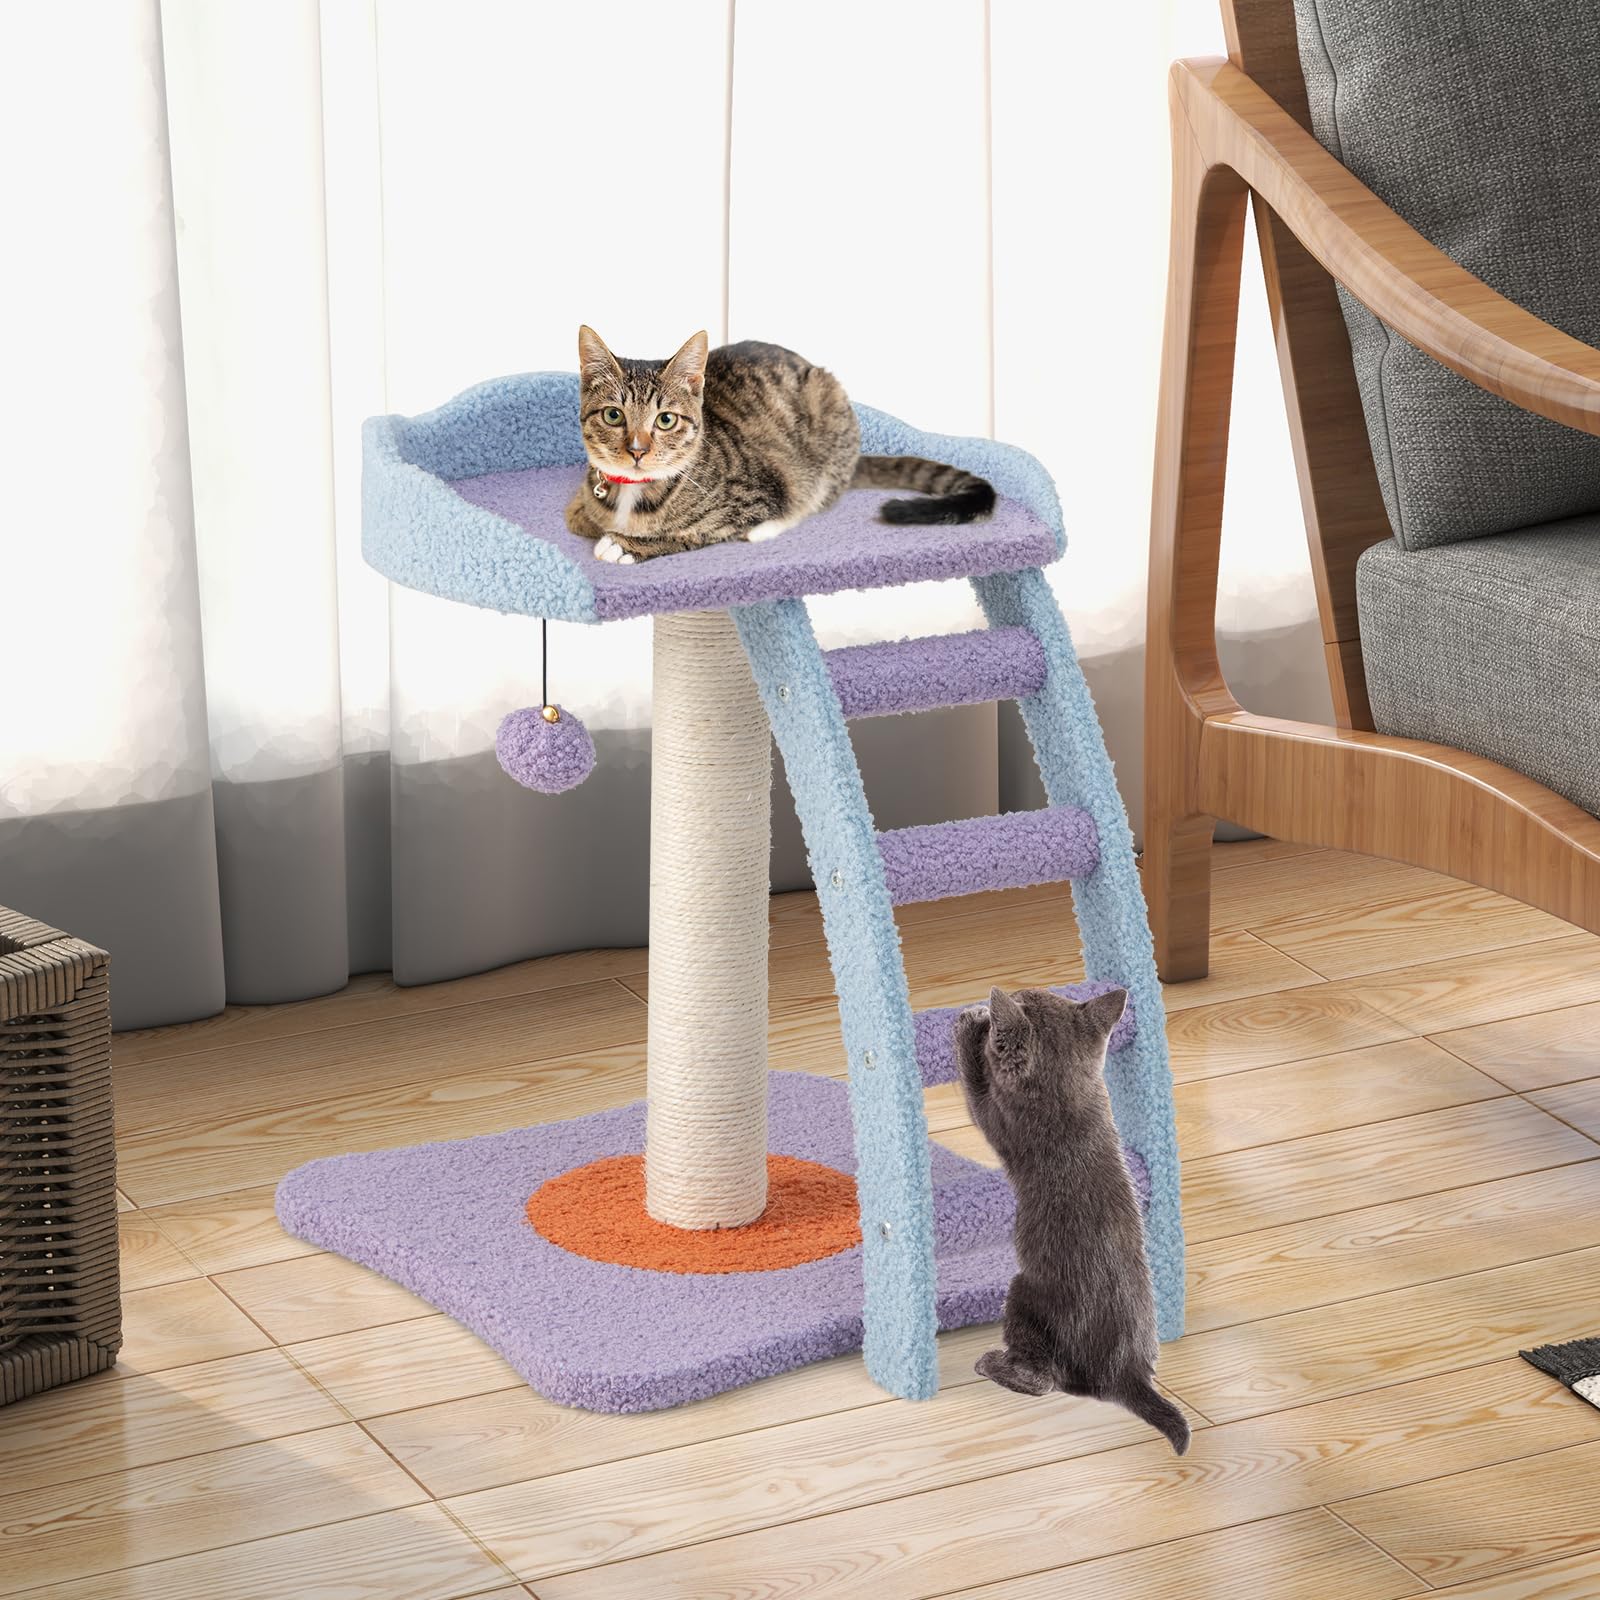 5 Ideas for Large & Small Cat Tower——Tangkula